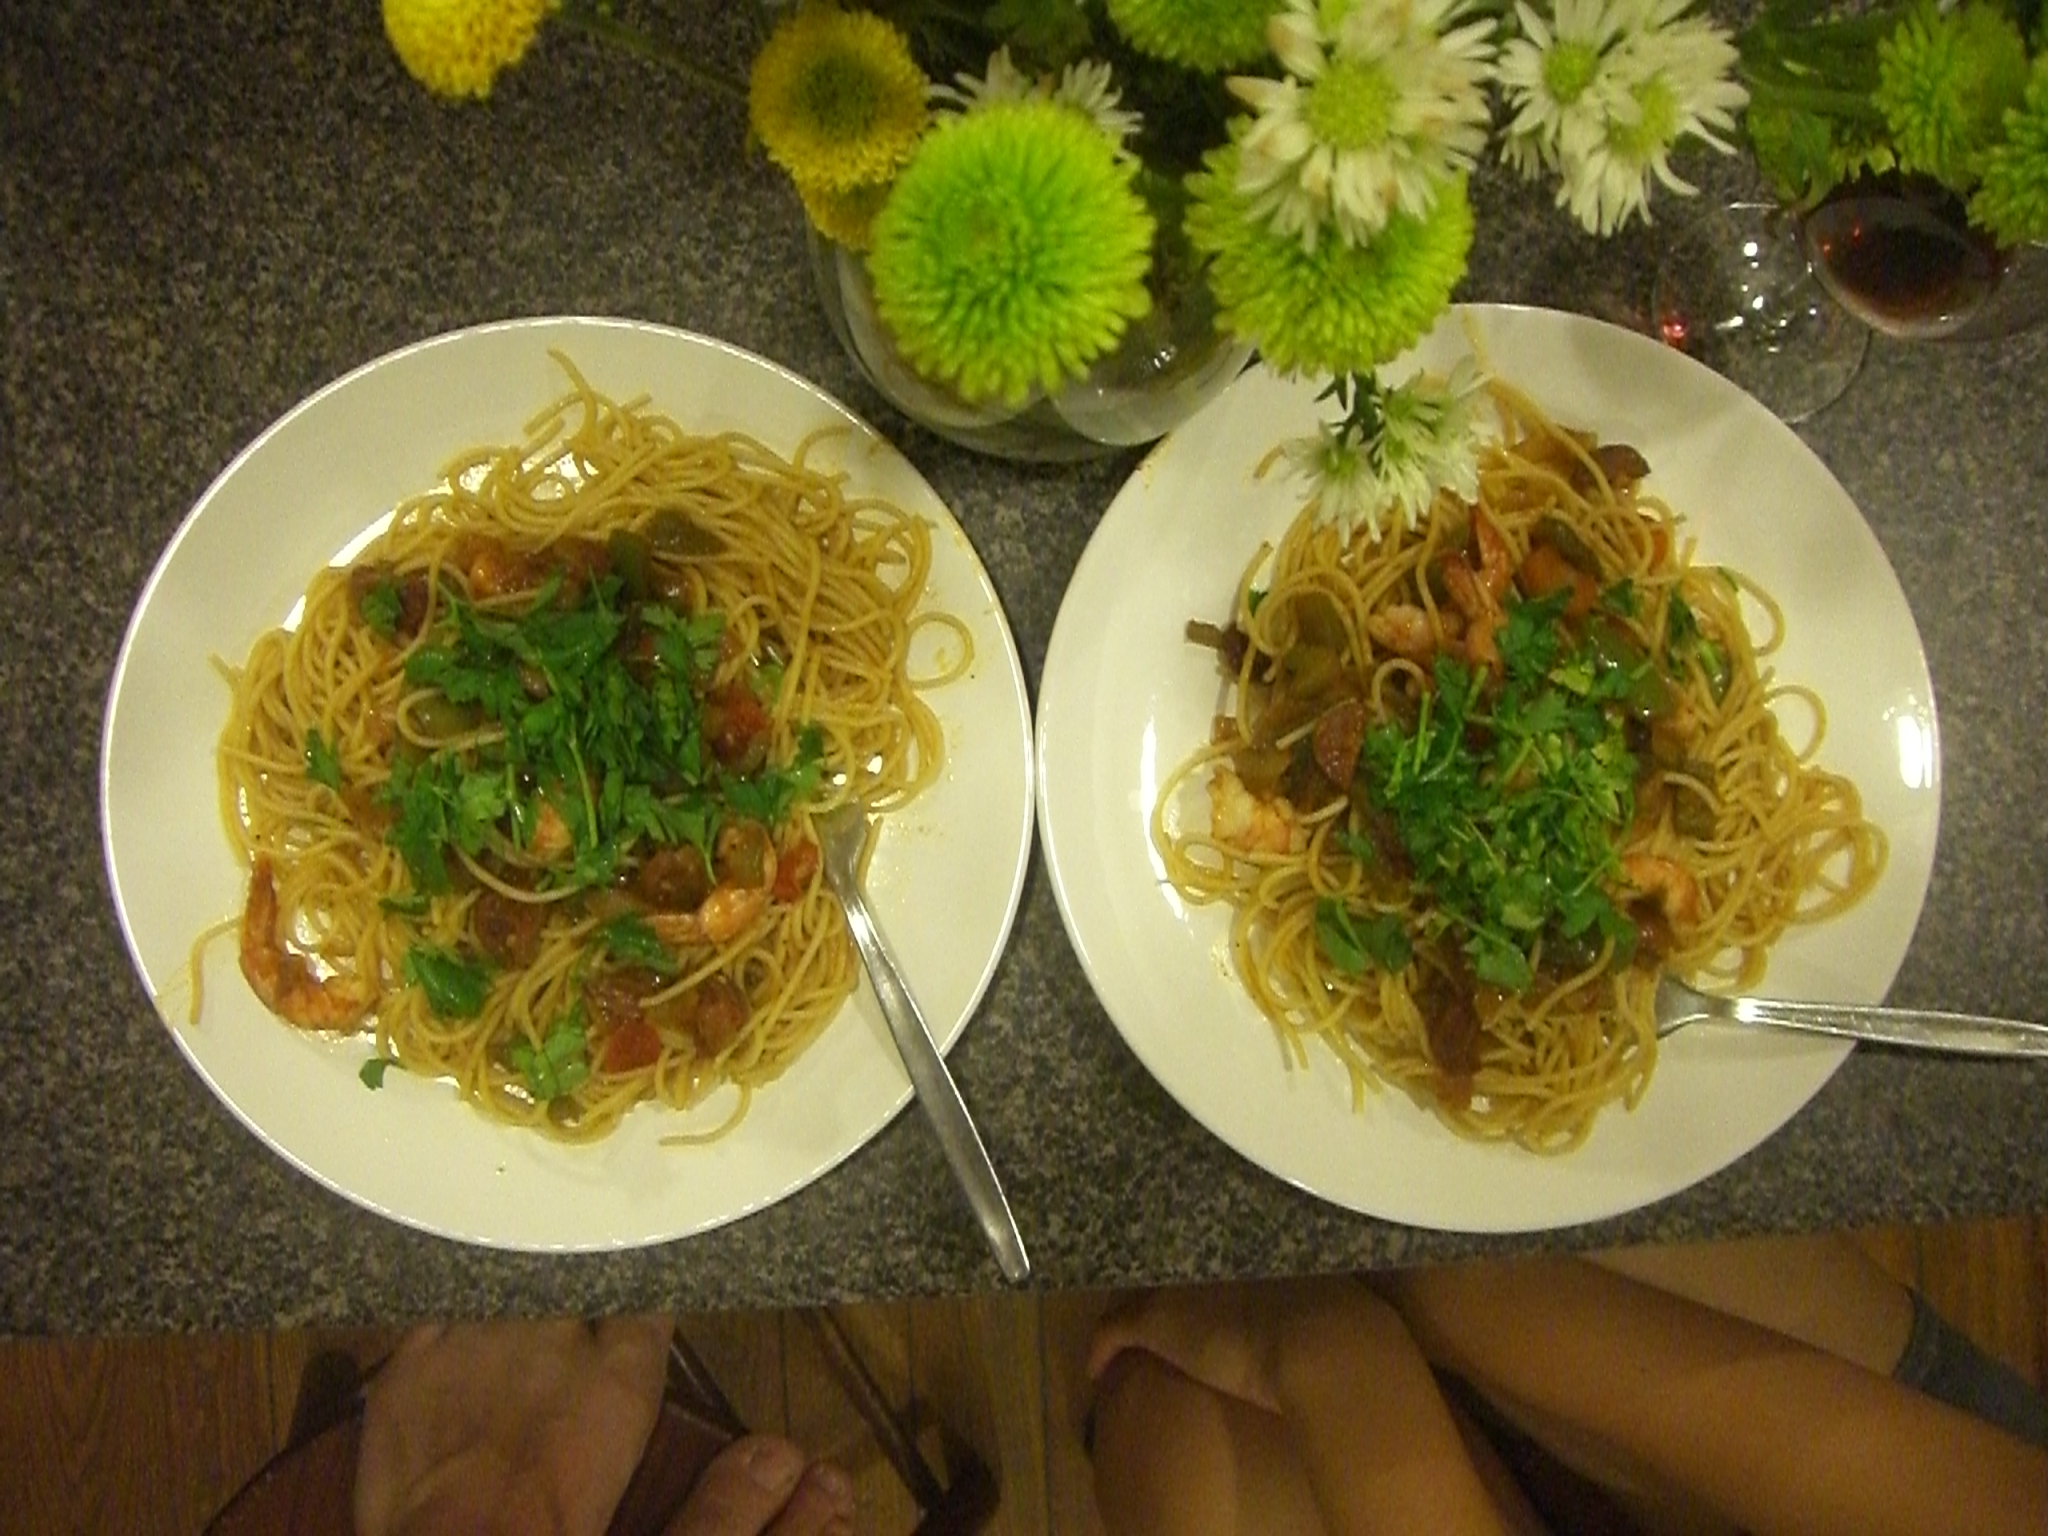 two plates of spaghetti, and a vase with flowers